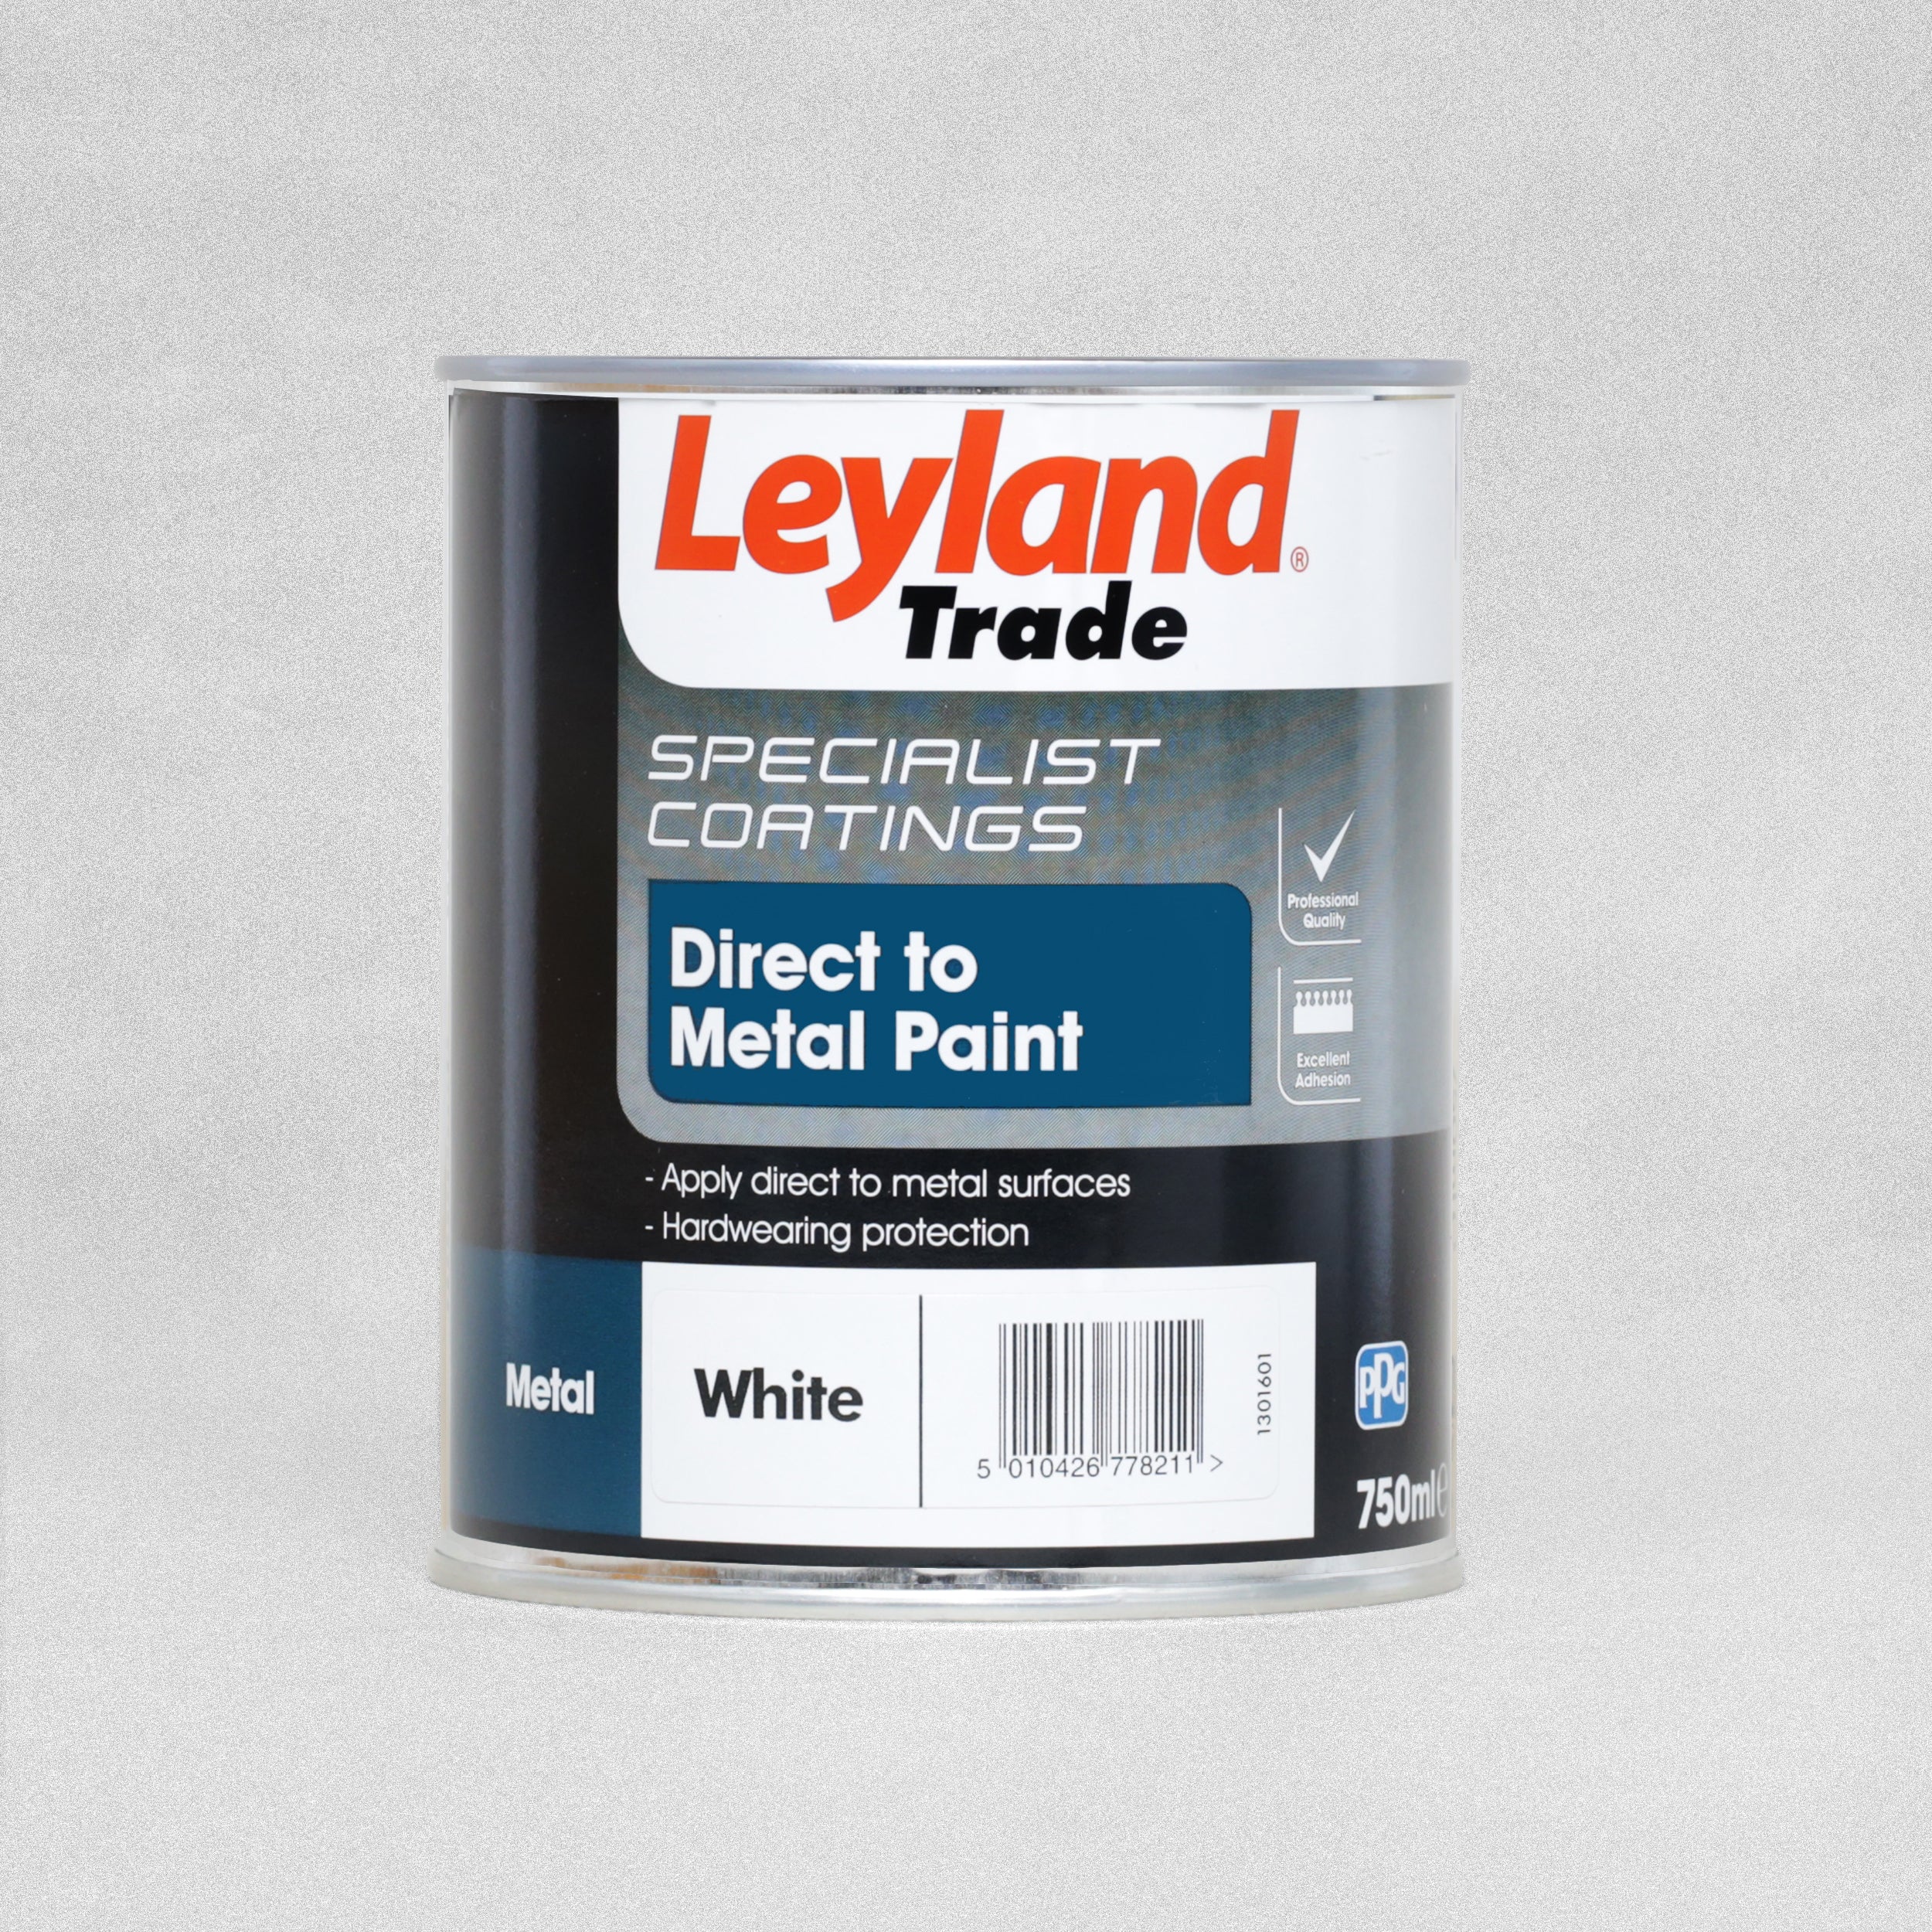 Leyland Trade Specialist Coatings Direct to Metal Paint 750ml - White